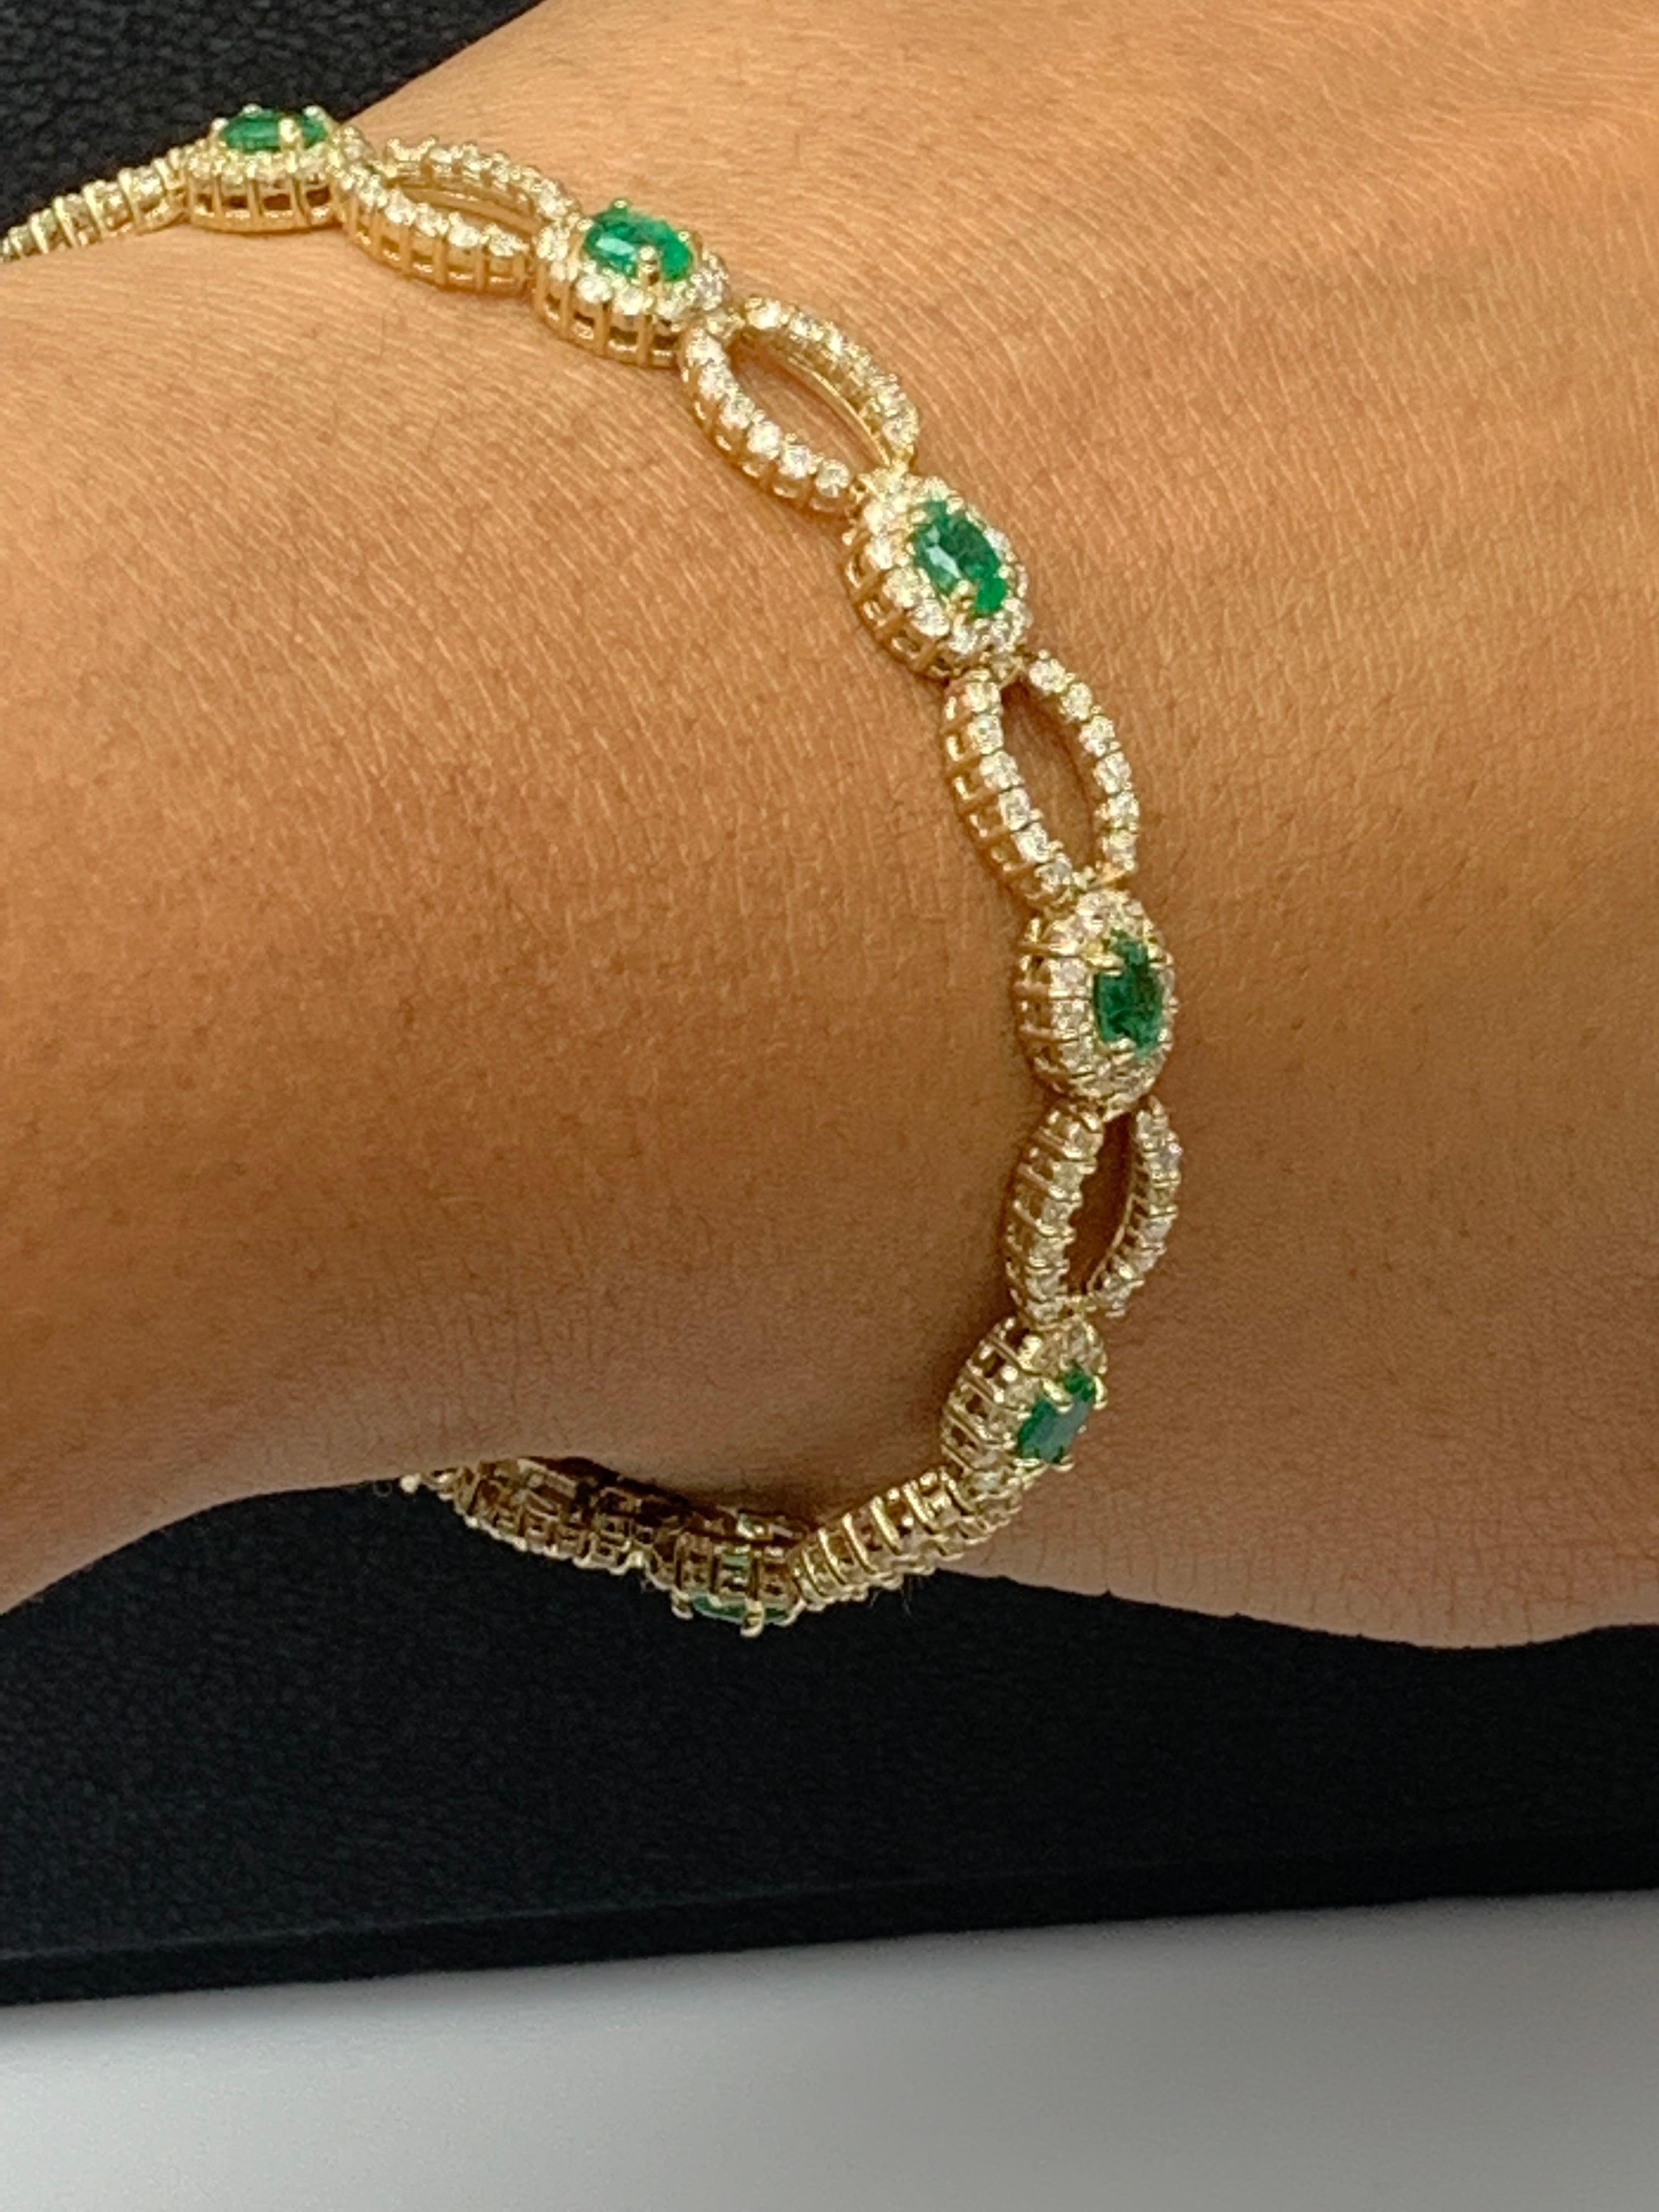 Open-Work 2.13 Carat Emerald and Diamond Bracelet in 14K Yellow Gold For Sale 3